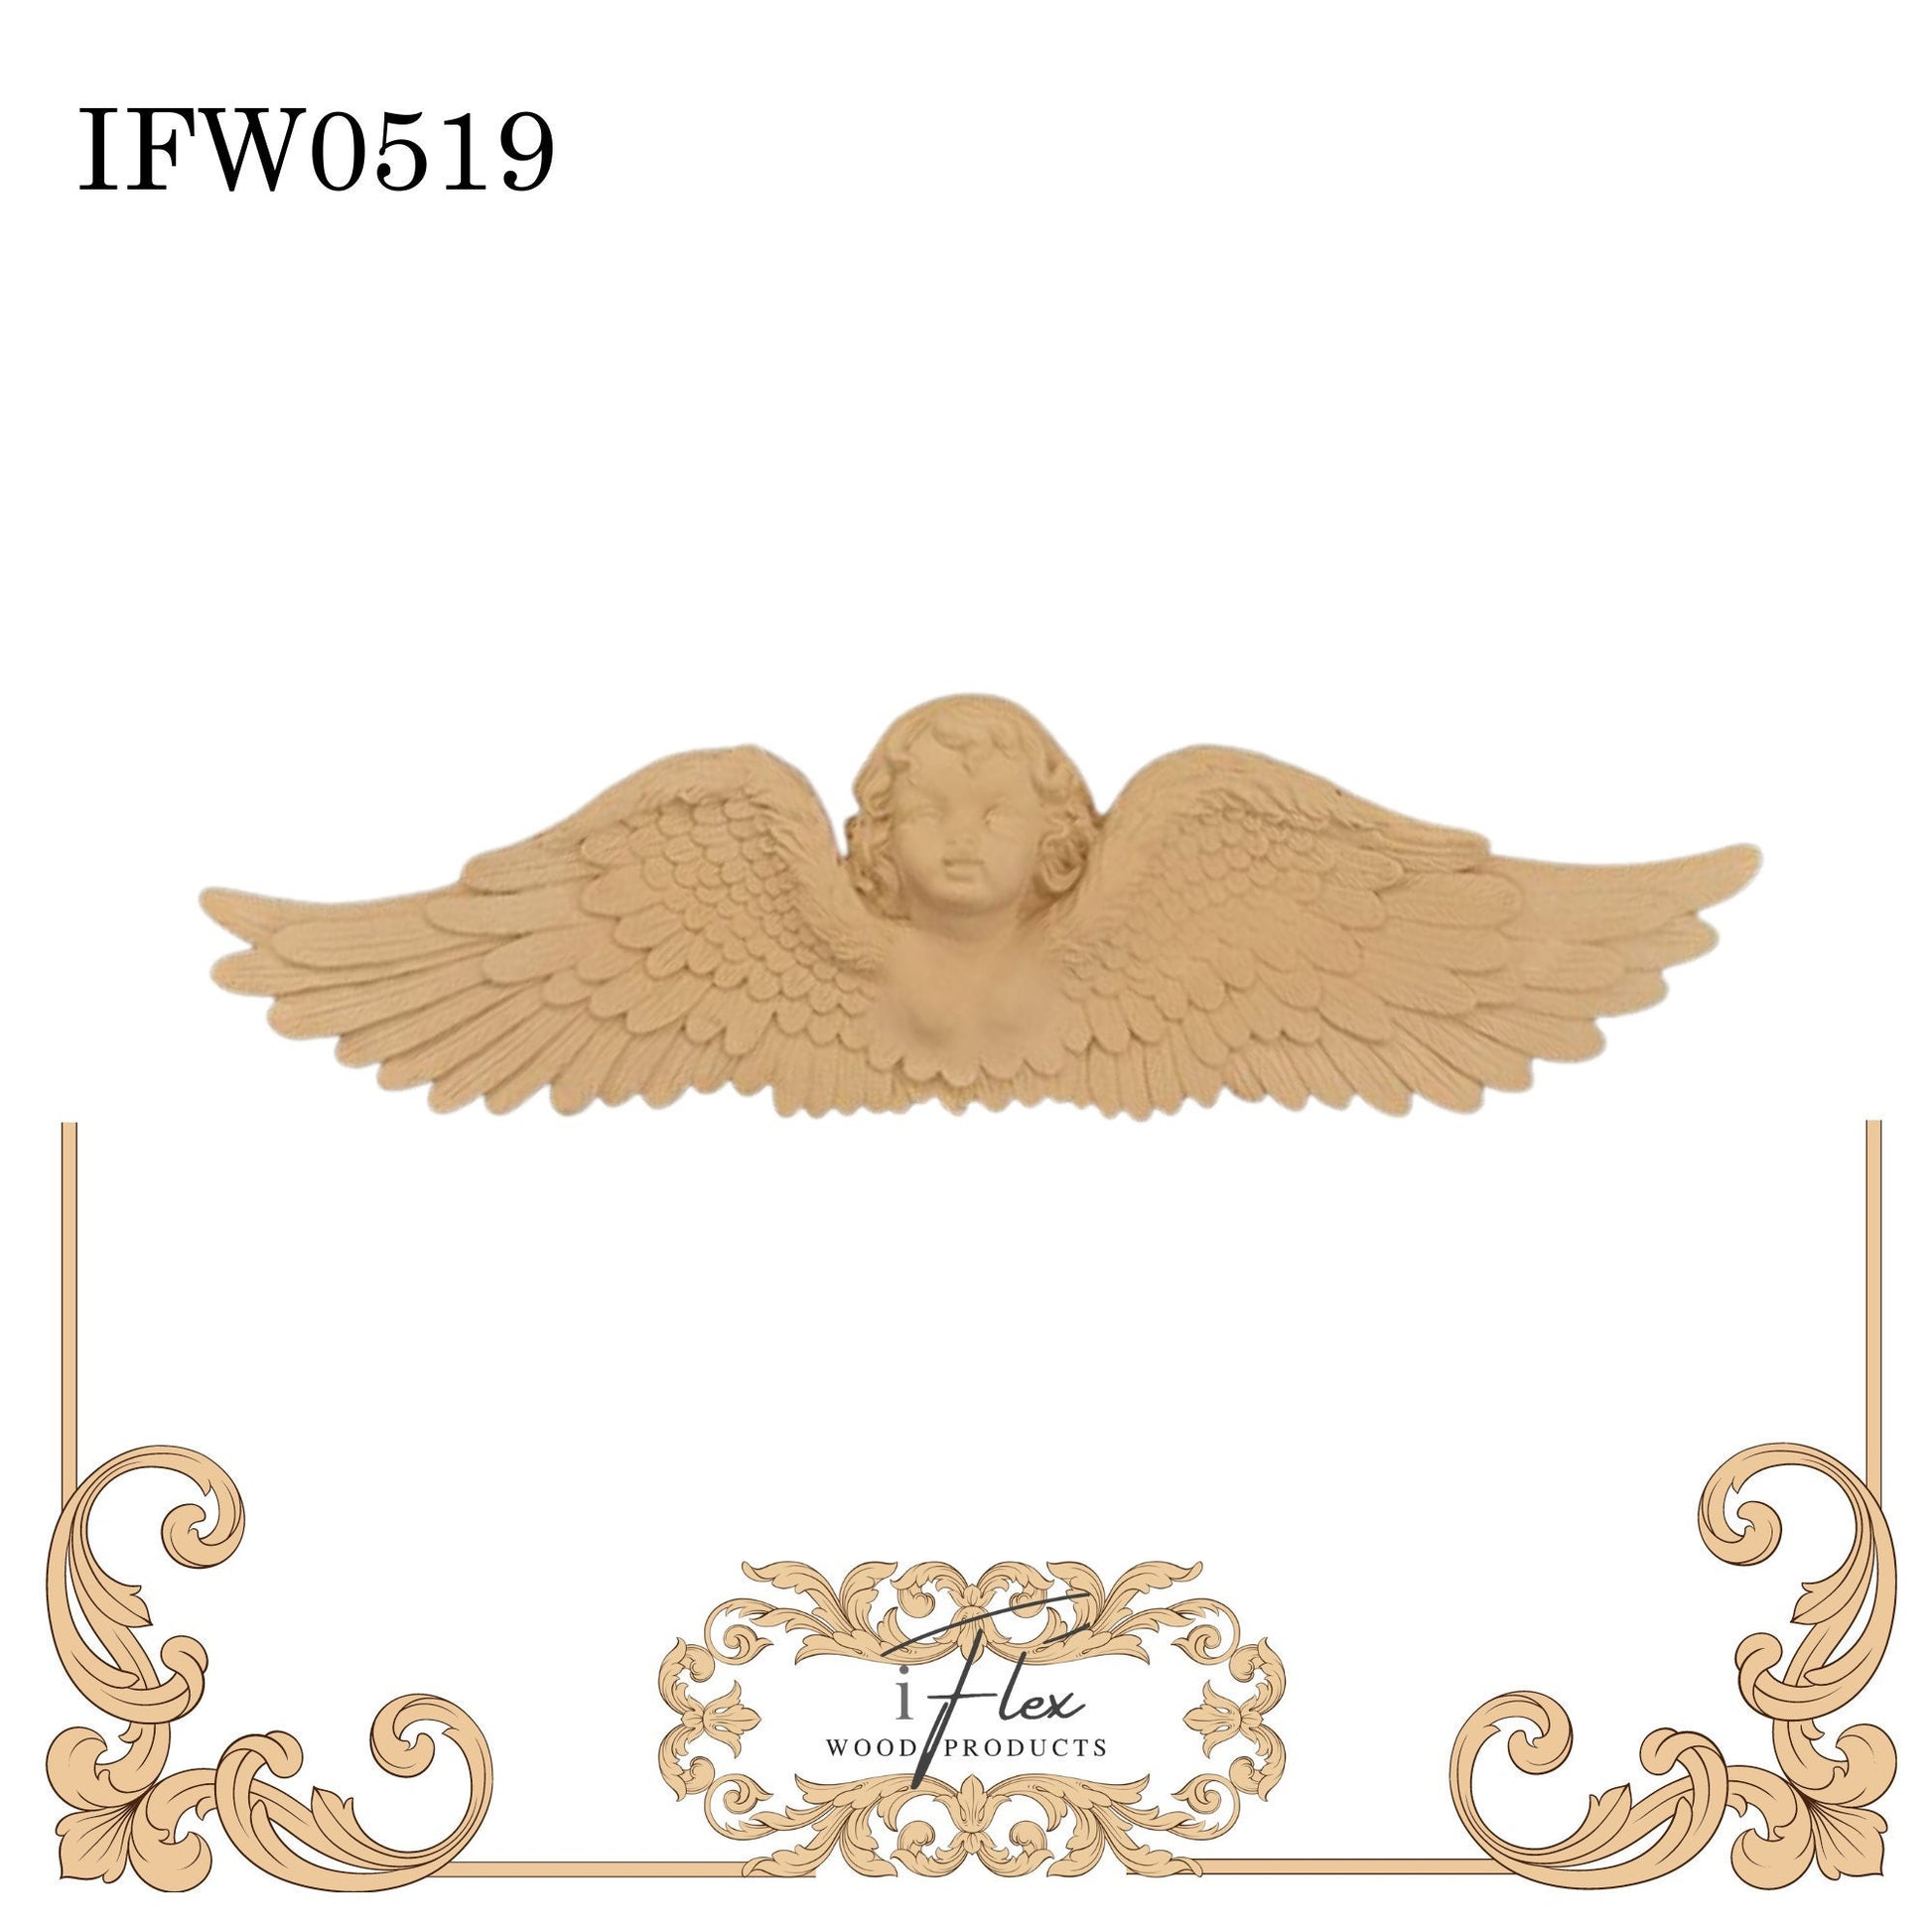 IFW 0519  iFlex Wood Products angel wings bendable mouldings, flexible, wooden appliques